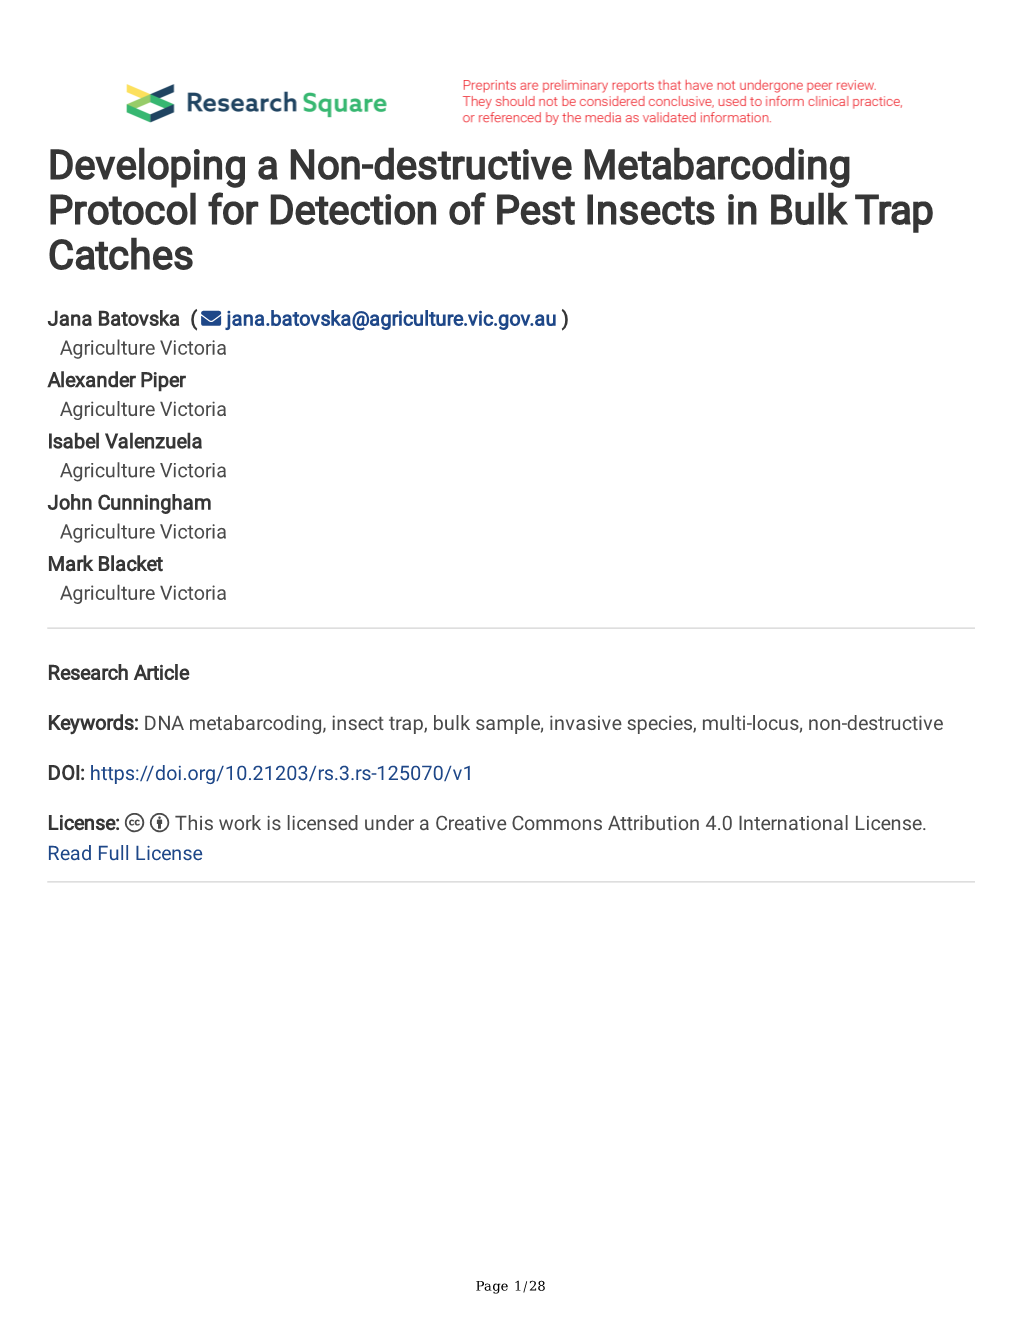 Developing a Non-Destructive Metabarcoding Protocol for Detection of Pest Insects in Bulk Trap Catches